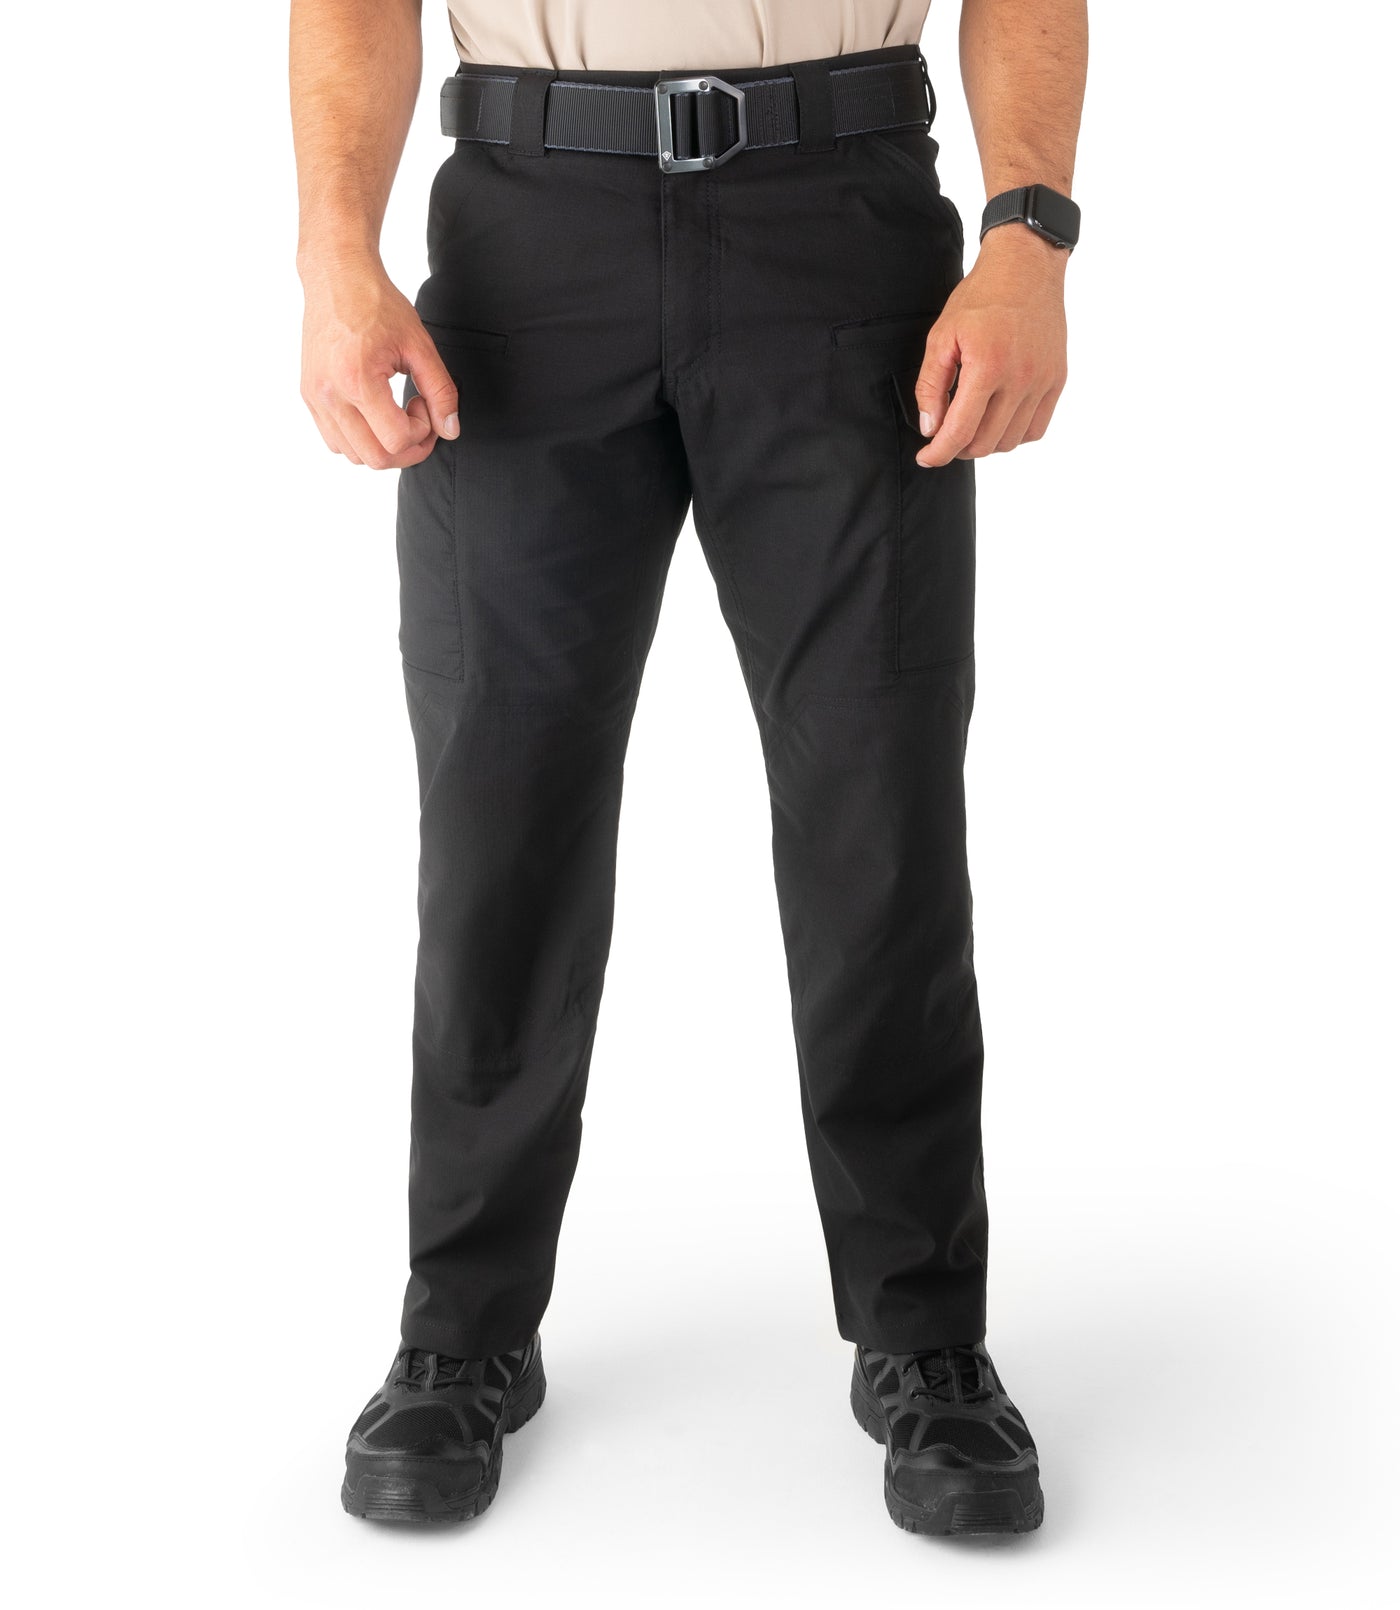 The V2 Tactical Pant Tactical – First